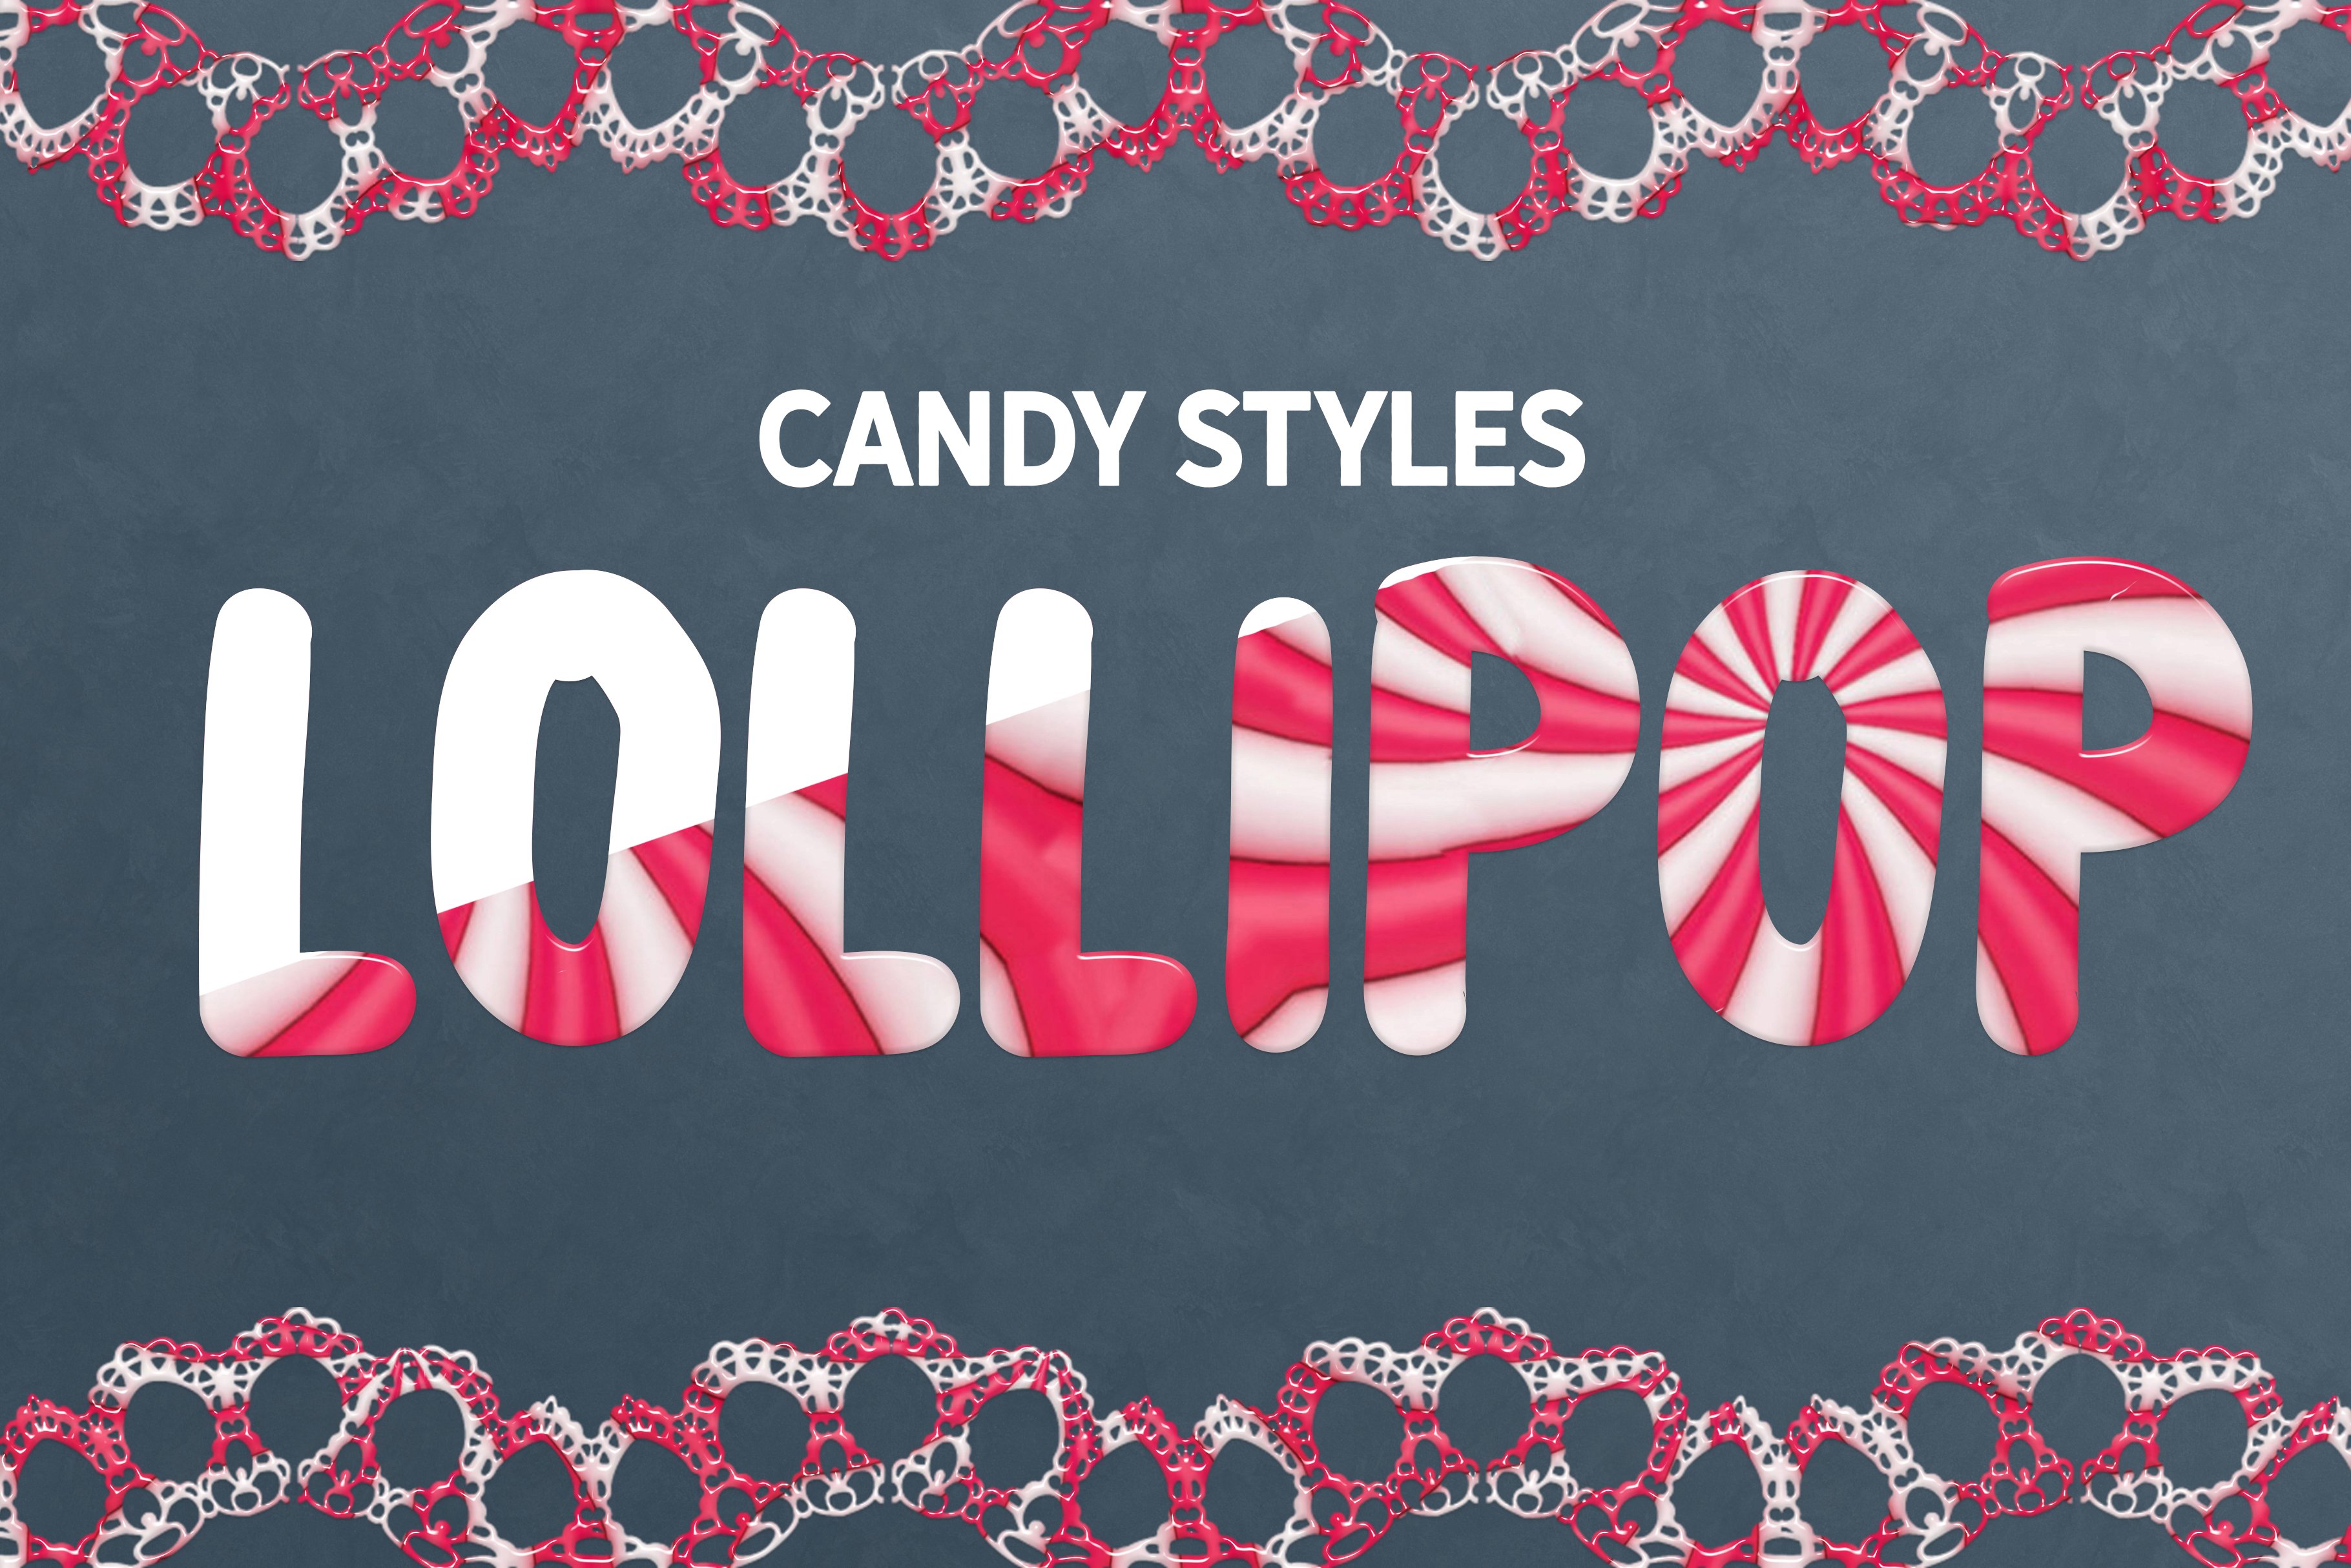 CANDY & CONFETTI Styles Photoshoppreview image.